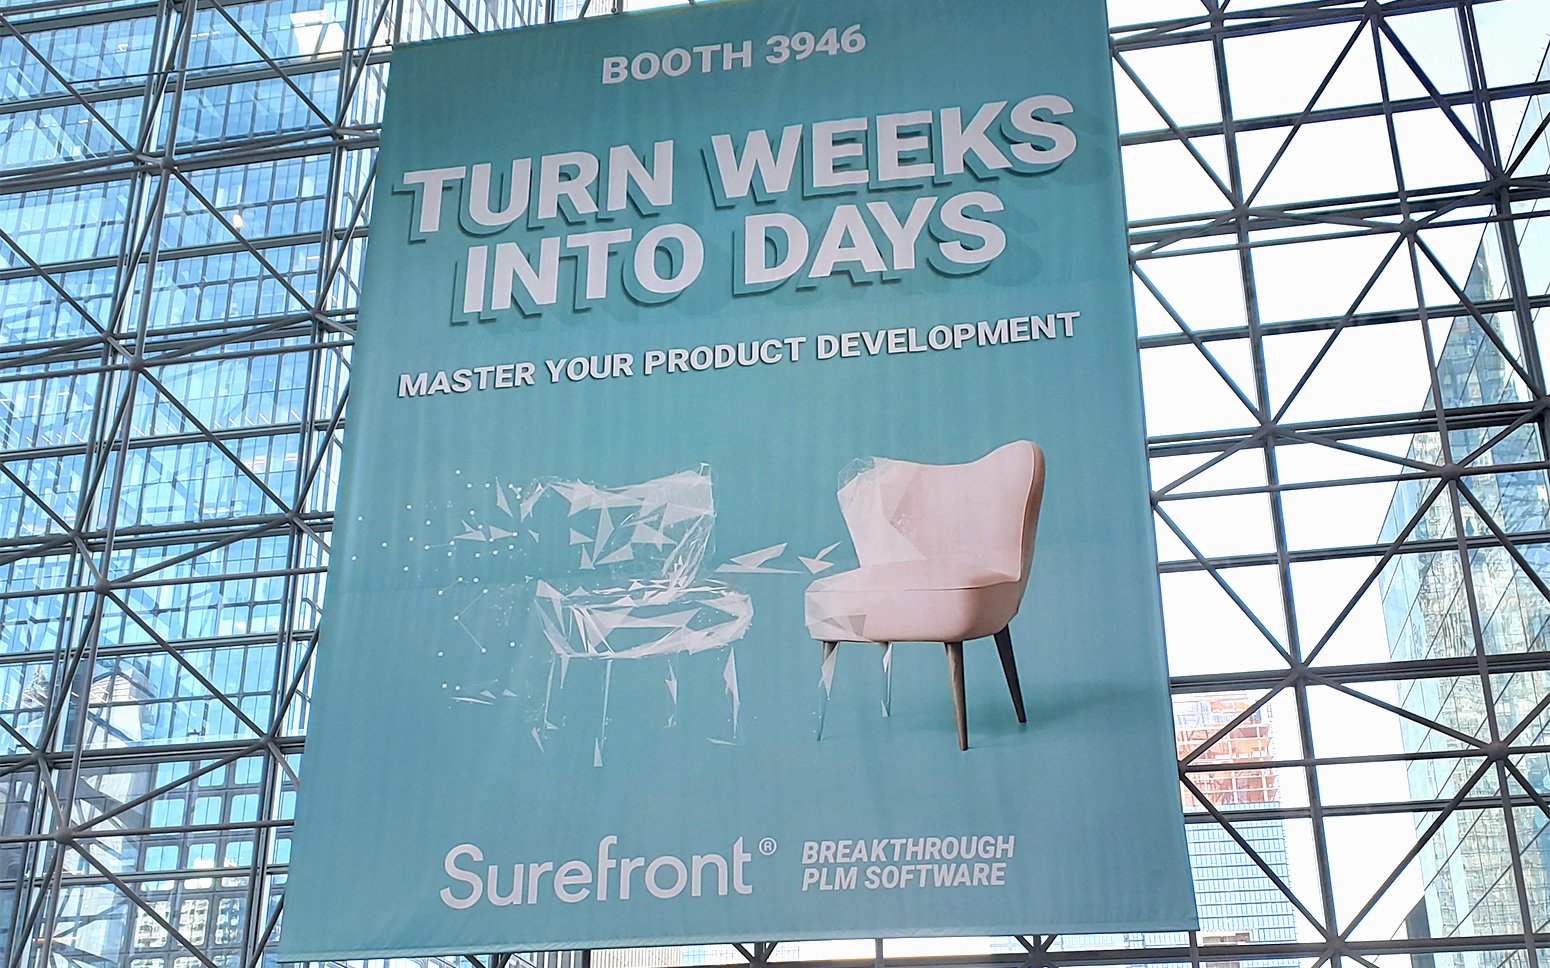 Surefront is a Unified Product Collaboration Platform with PIM, CRM, and PLM solutions.